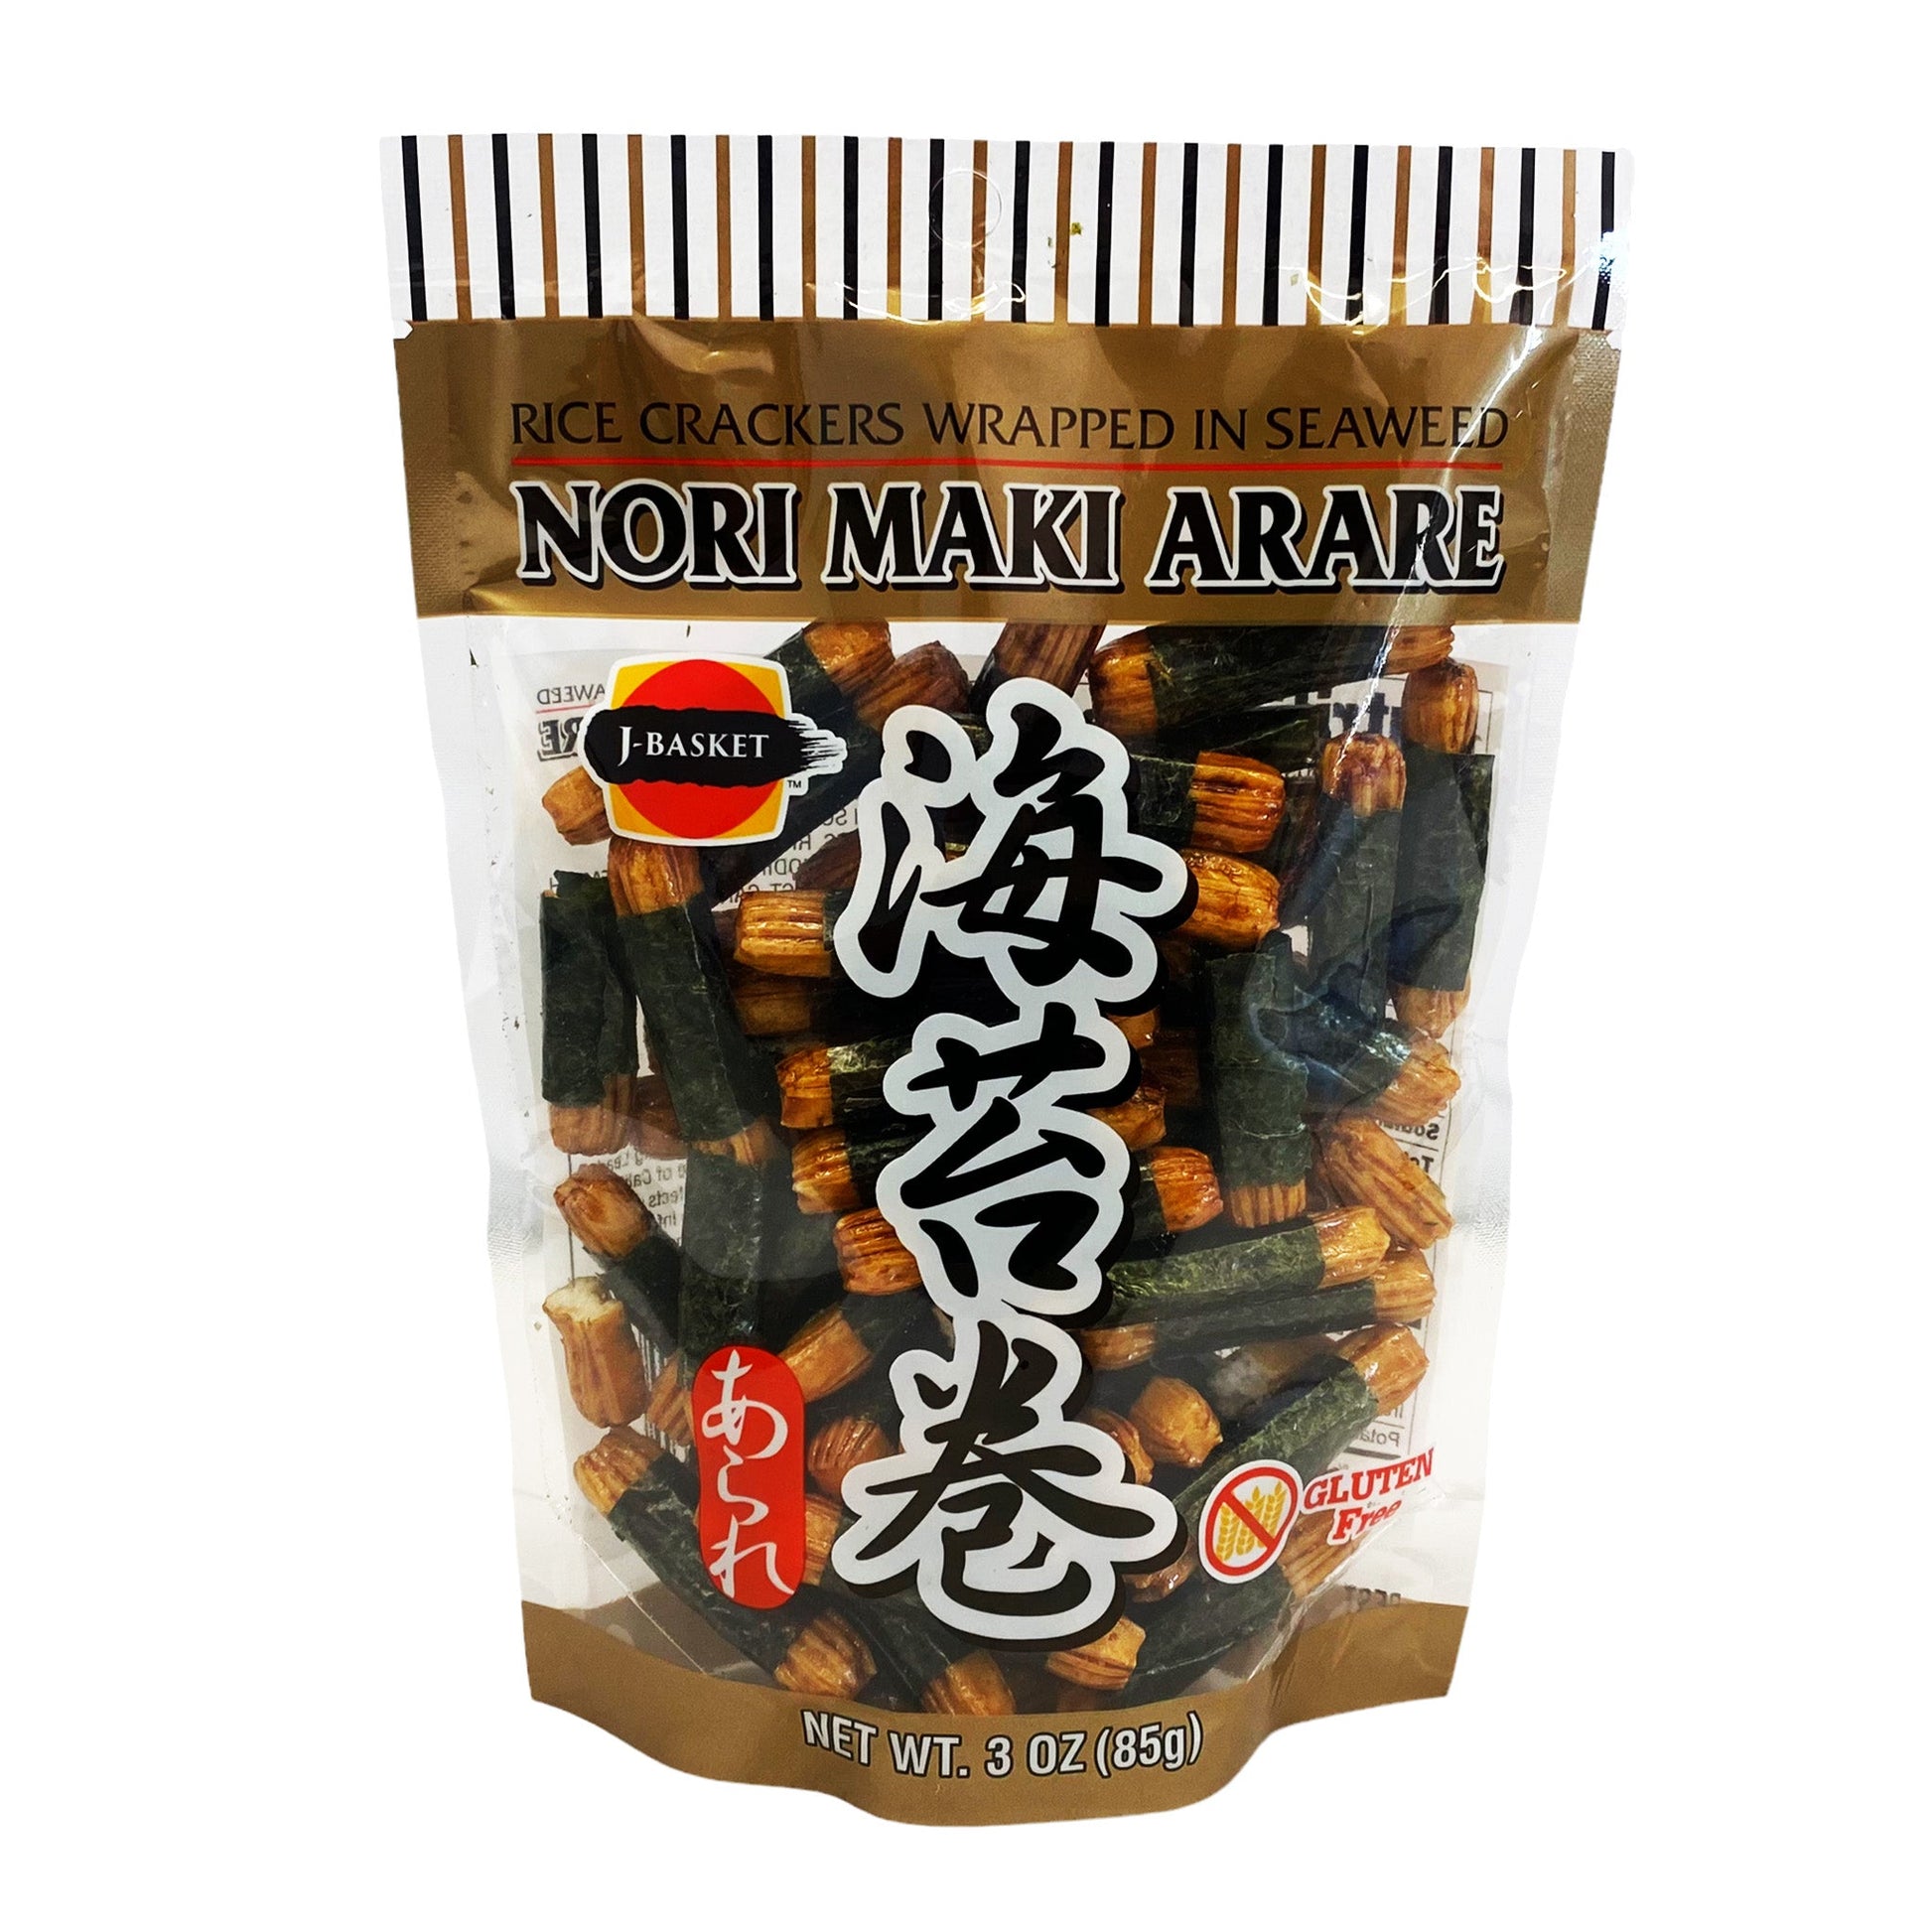 Front graphic view of J-Basket Seaweed Rice Cracker 3oz